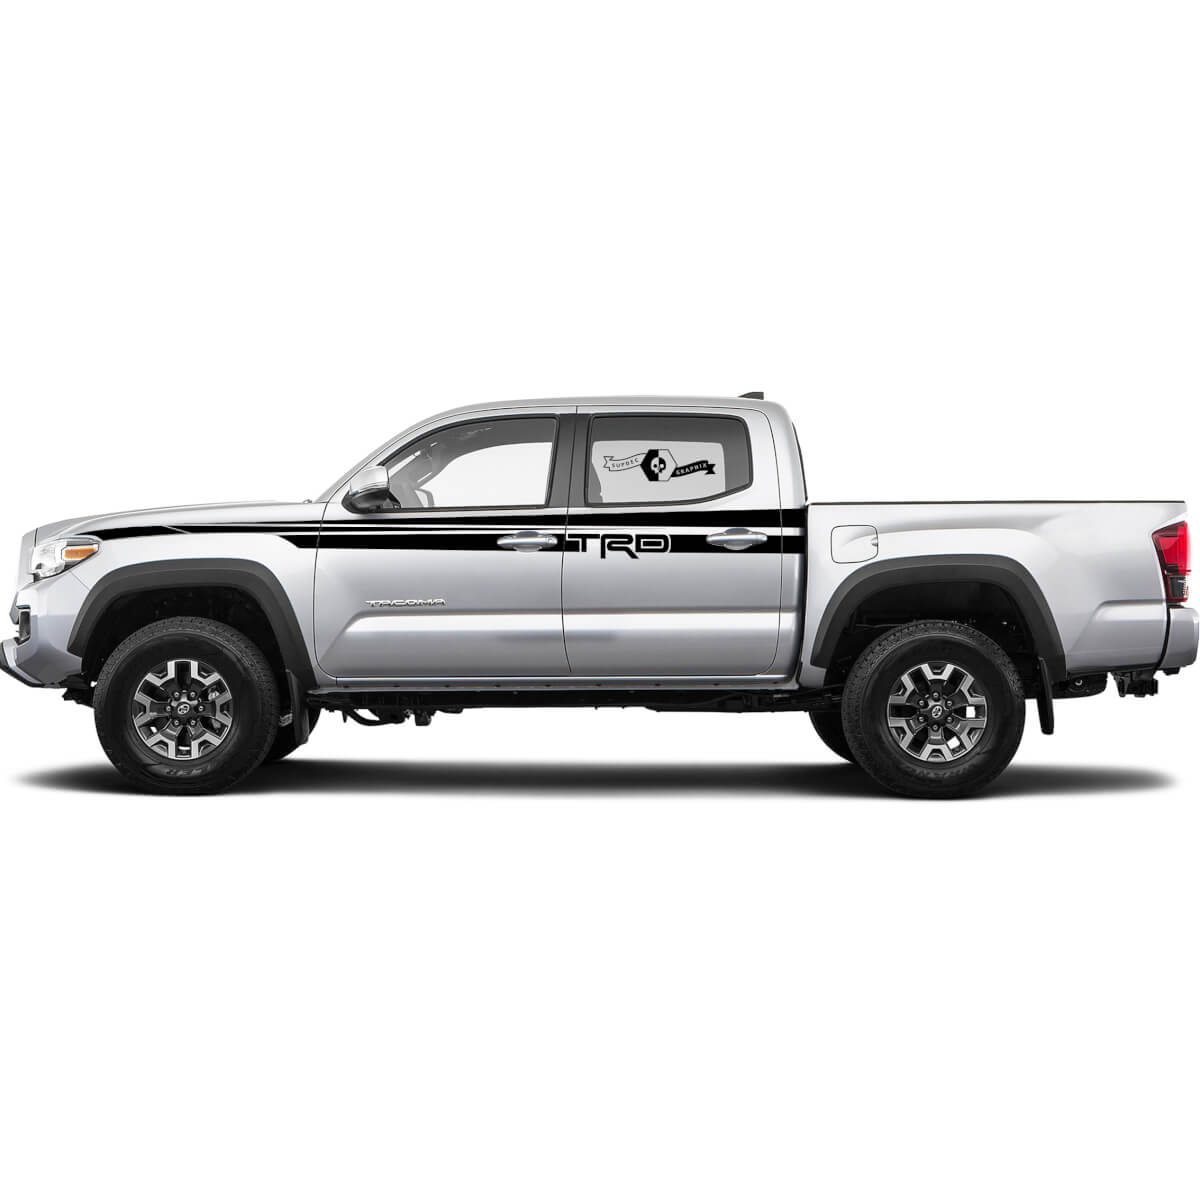 2X Tacoma Toyota TRD Off Road Truck side Doors Decals Vinyl Stickers Black Lines